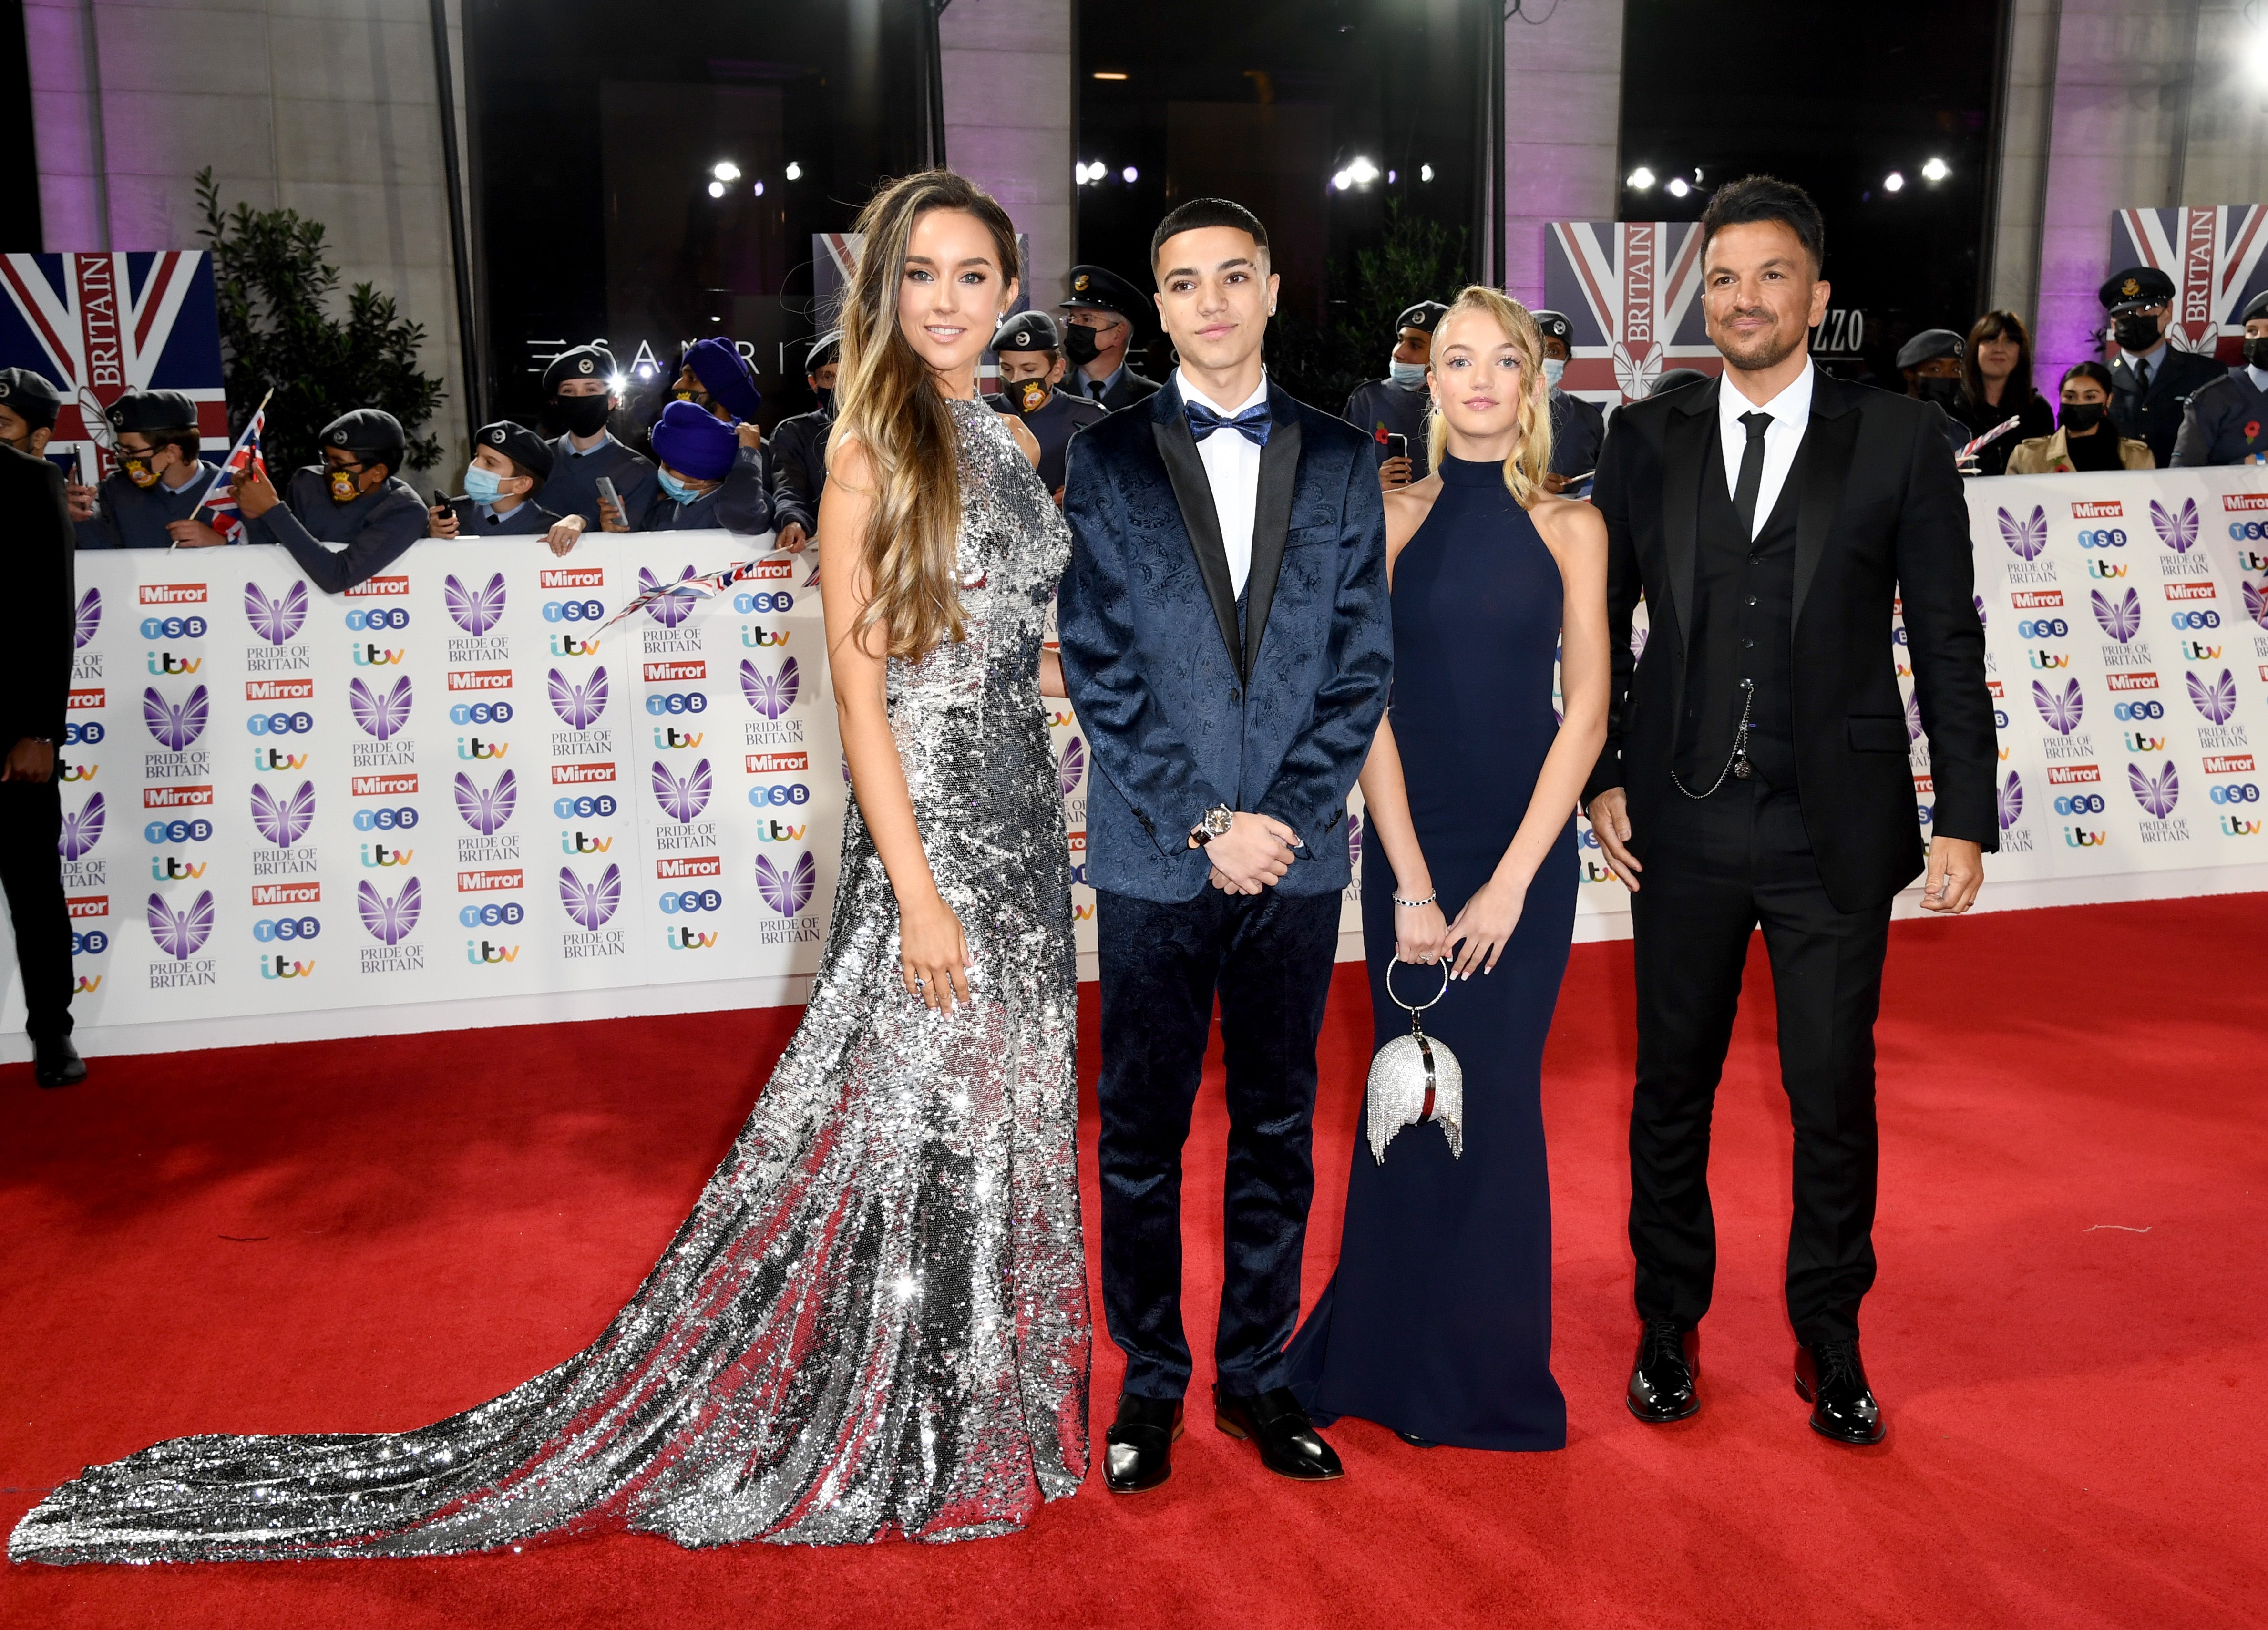 Emily MacDonagh, Junior Savva Andreas Andre, Princess Tiaamii Crystal Esther Andre and Peter Andre attend the Pride Of Britain Awards 2021